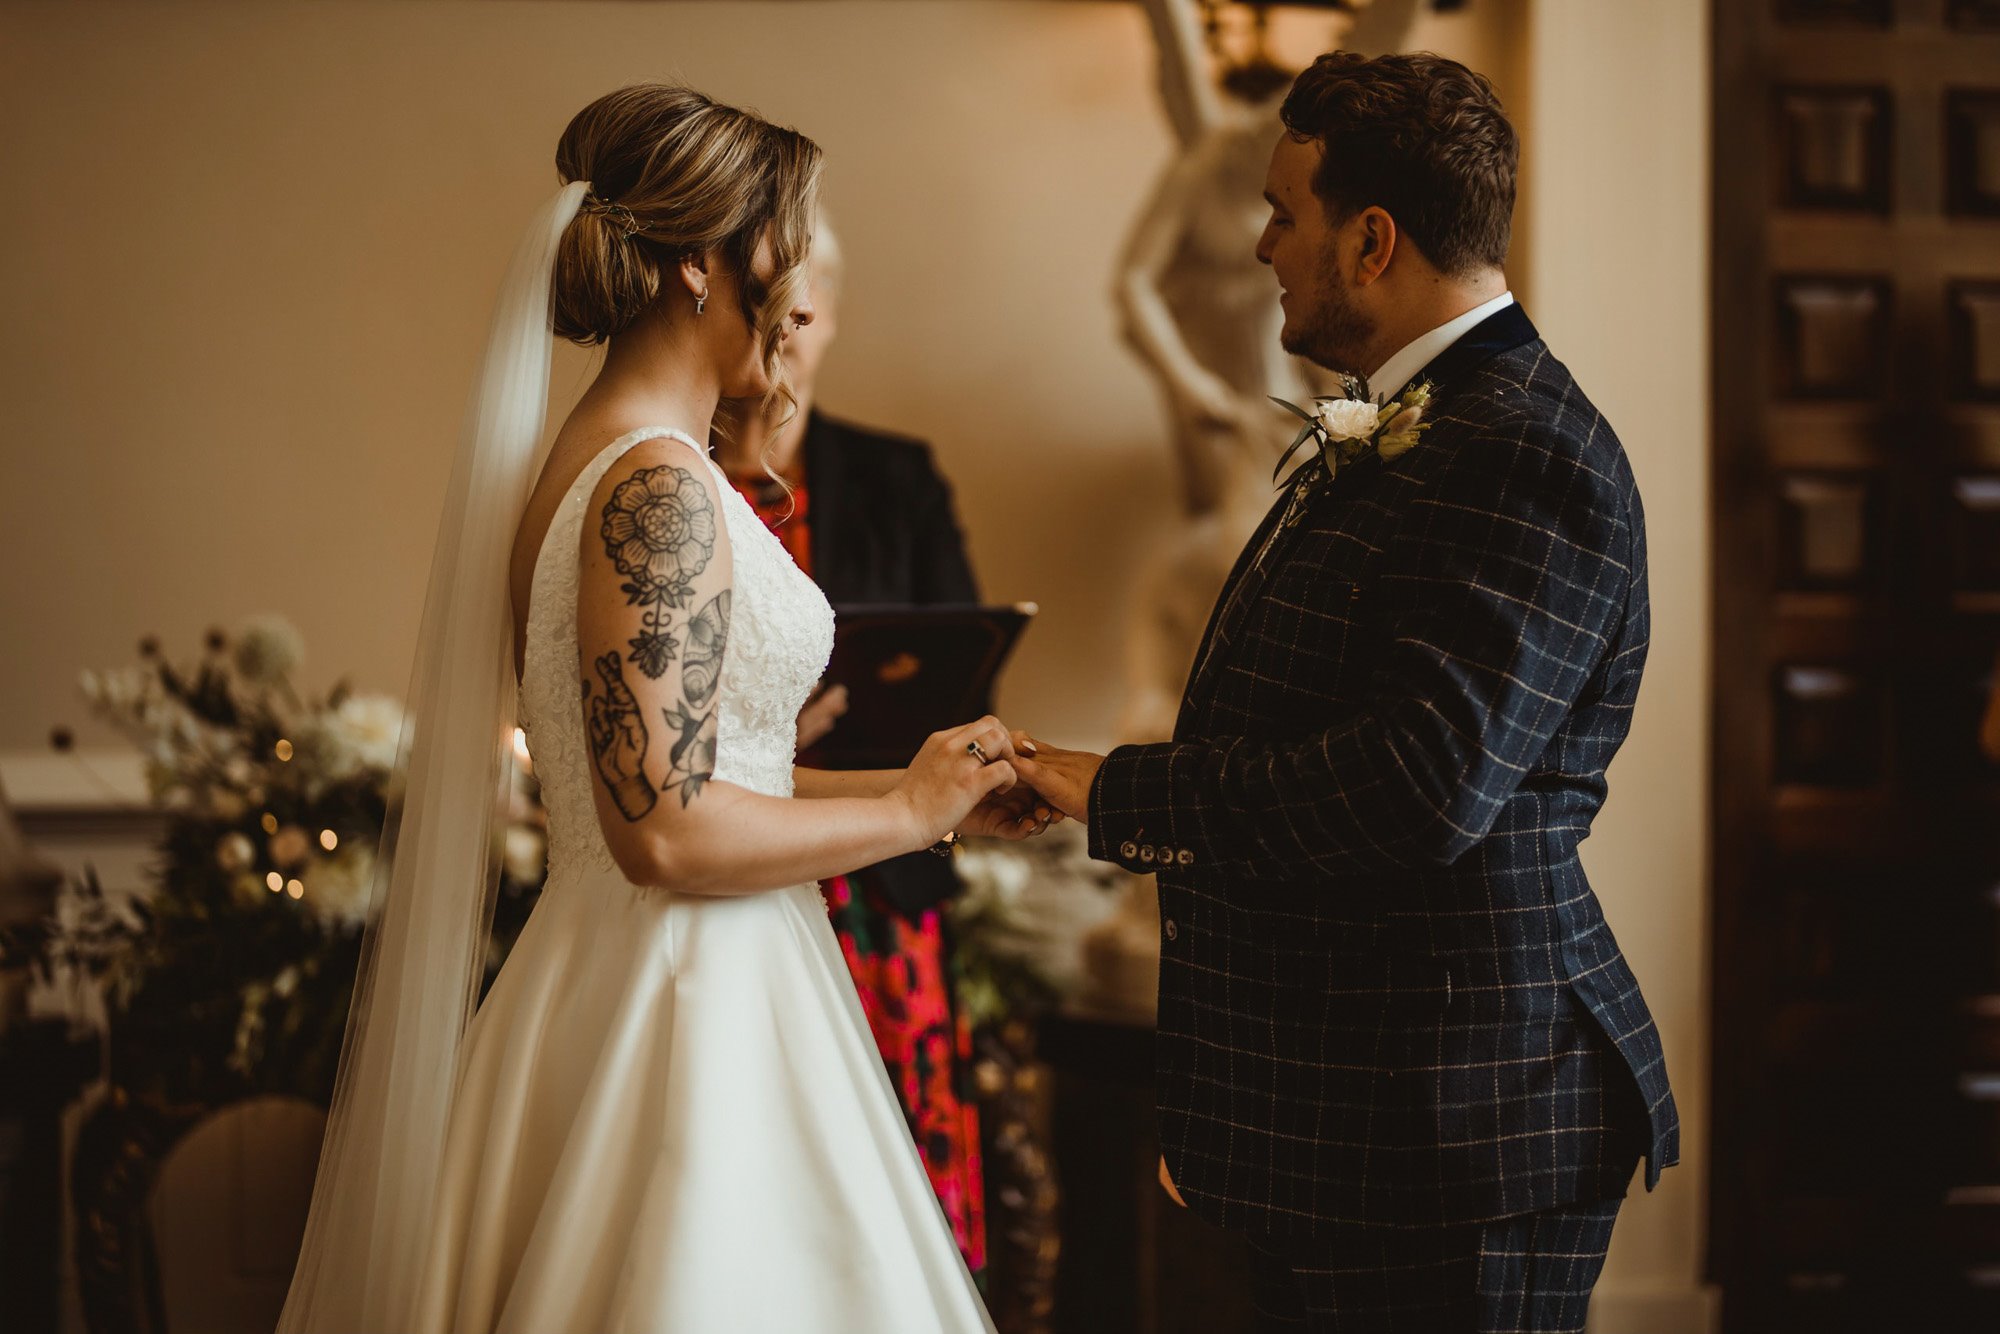 Tattooed bride and groom in tweed suit at their wedding ceremony in stately home 